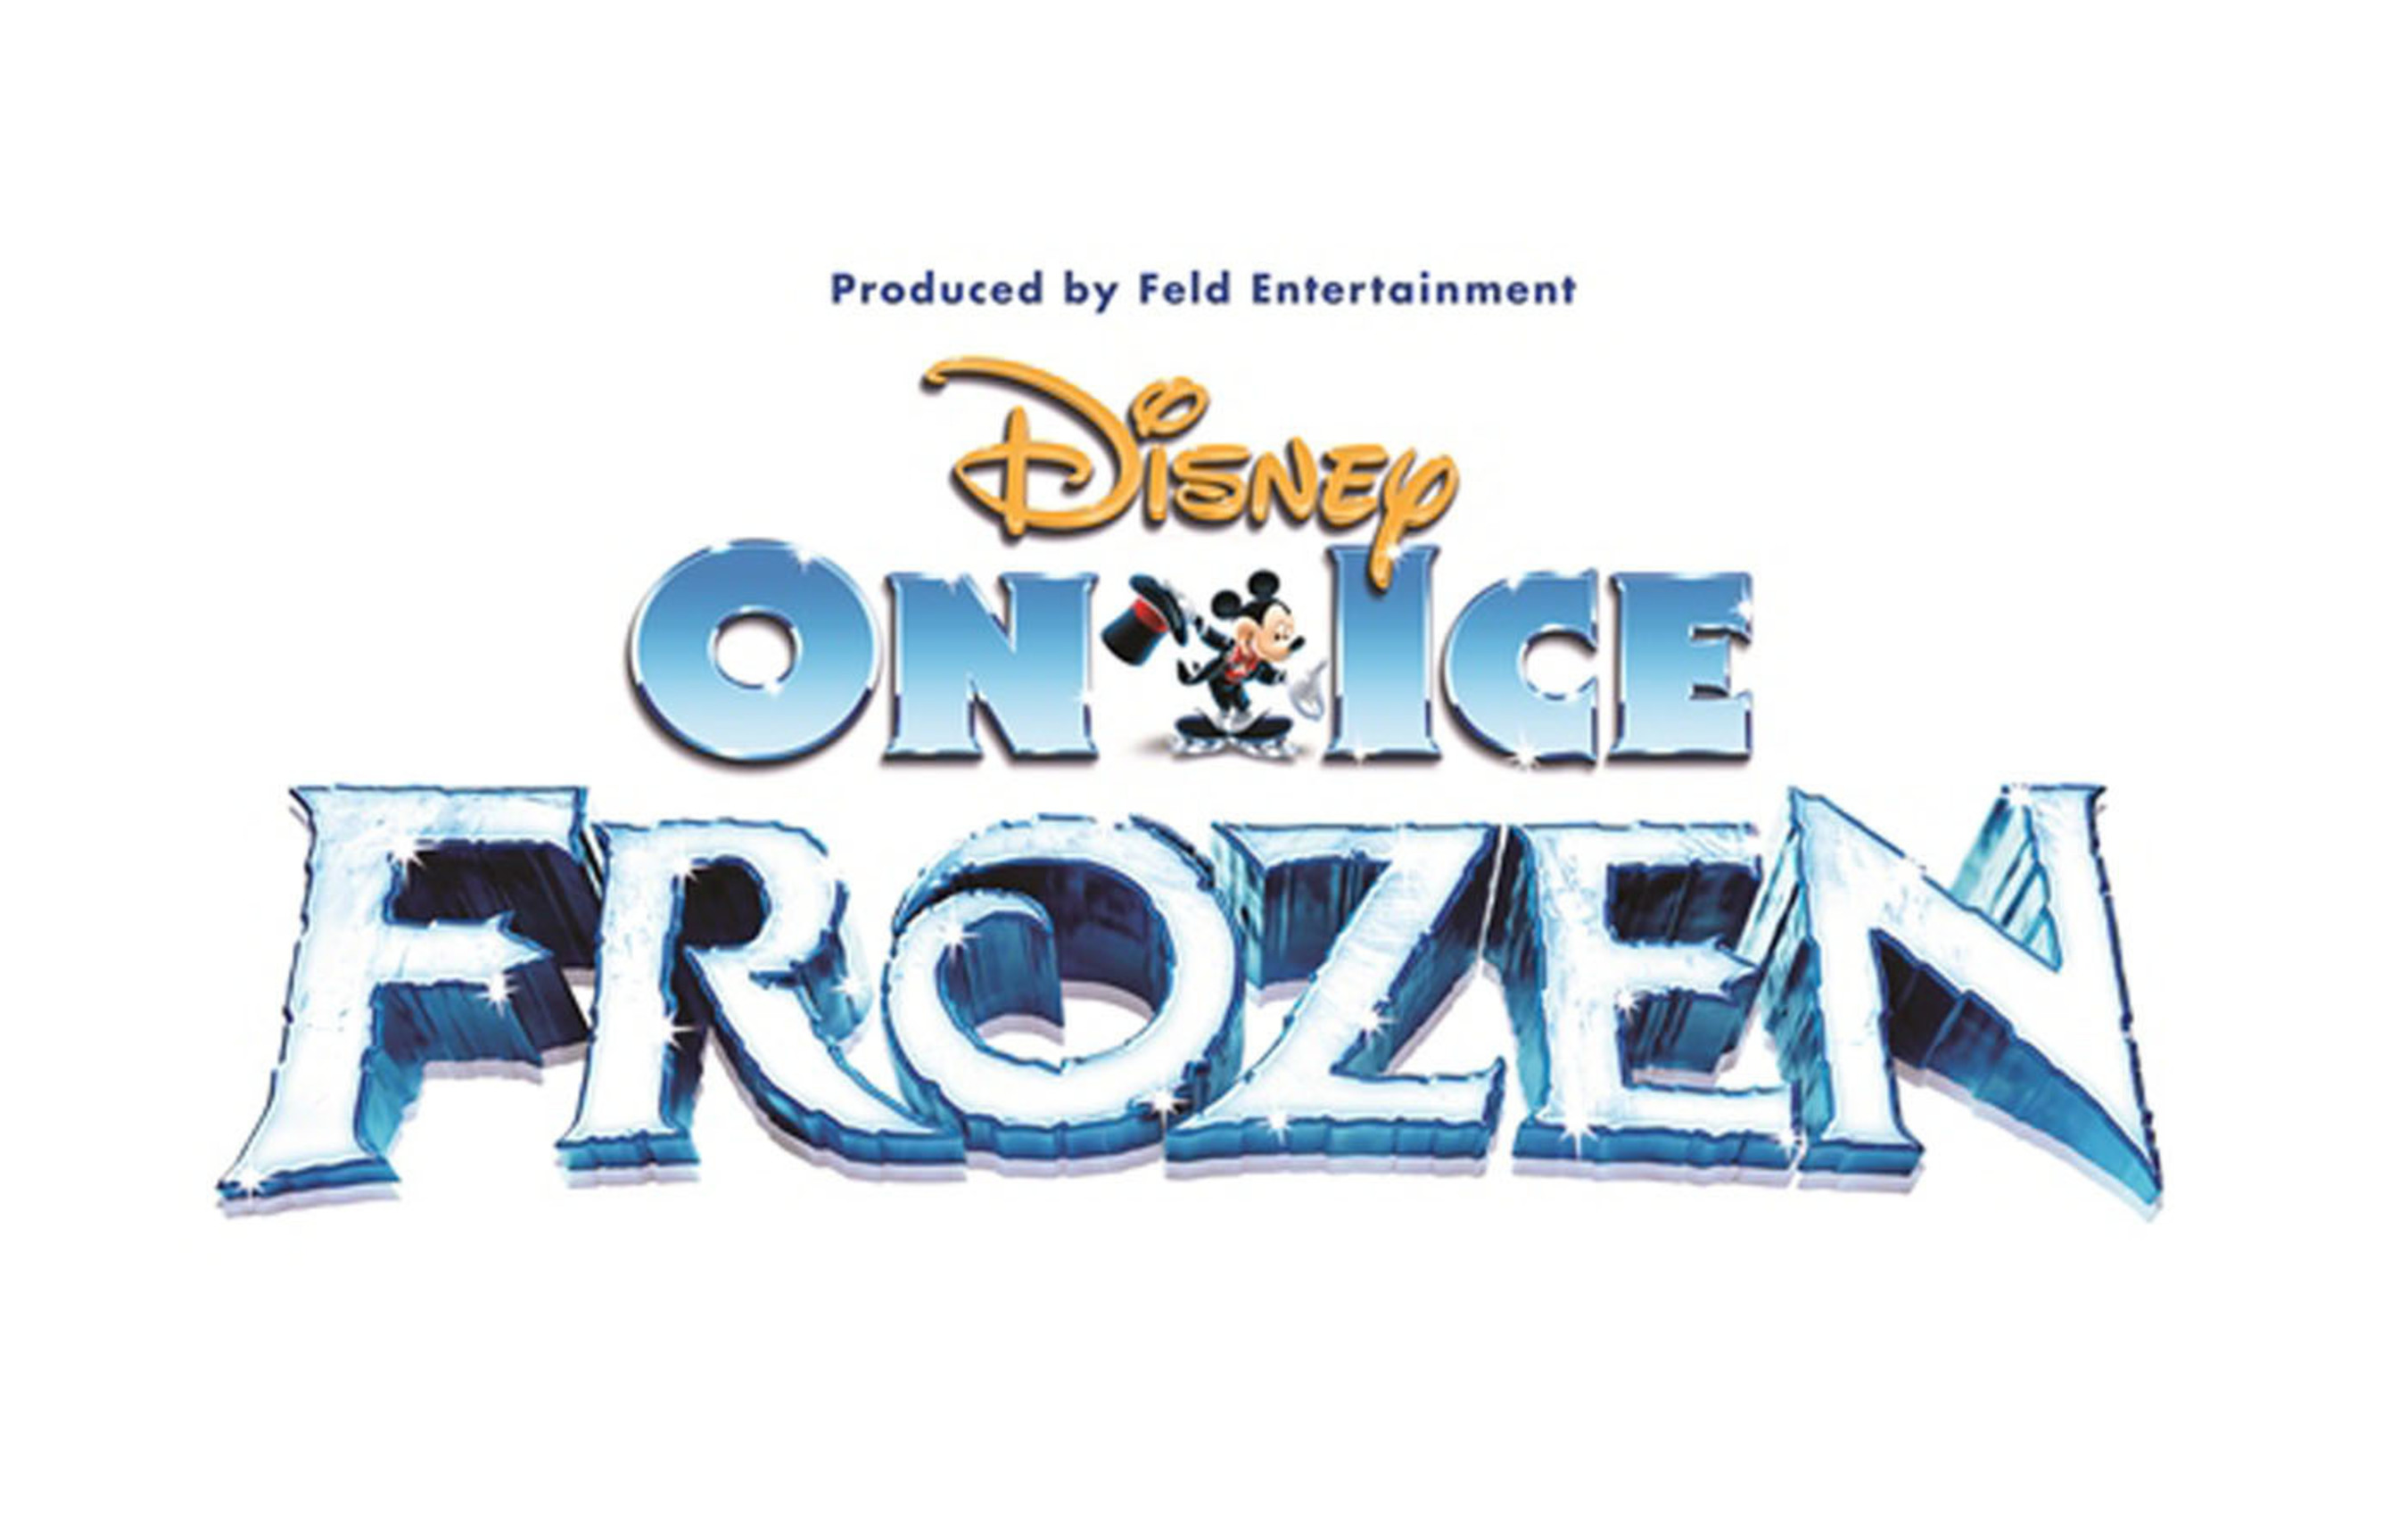 Tickets on sale now for Disney On Ice presents Frozen, featuring dynamic sisters Anna and Elsa, appearing for the first time in a live production. (PRNewsFoto/Feld Entertainment)